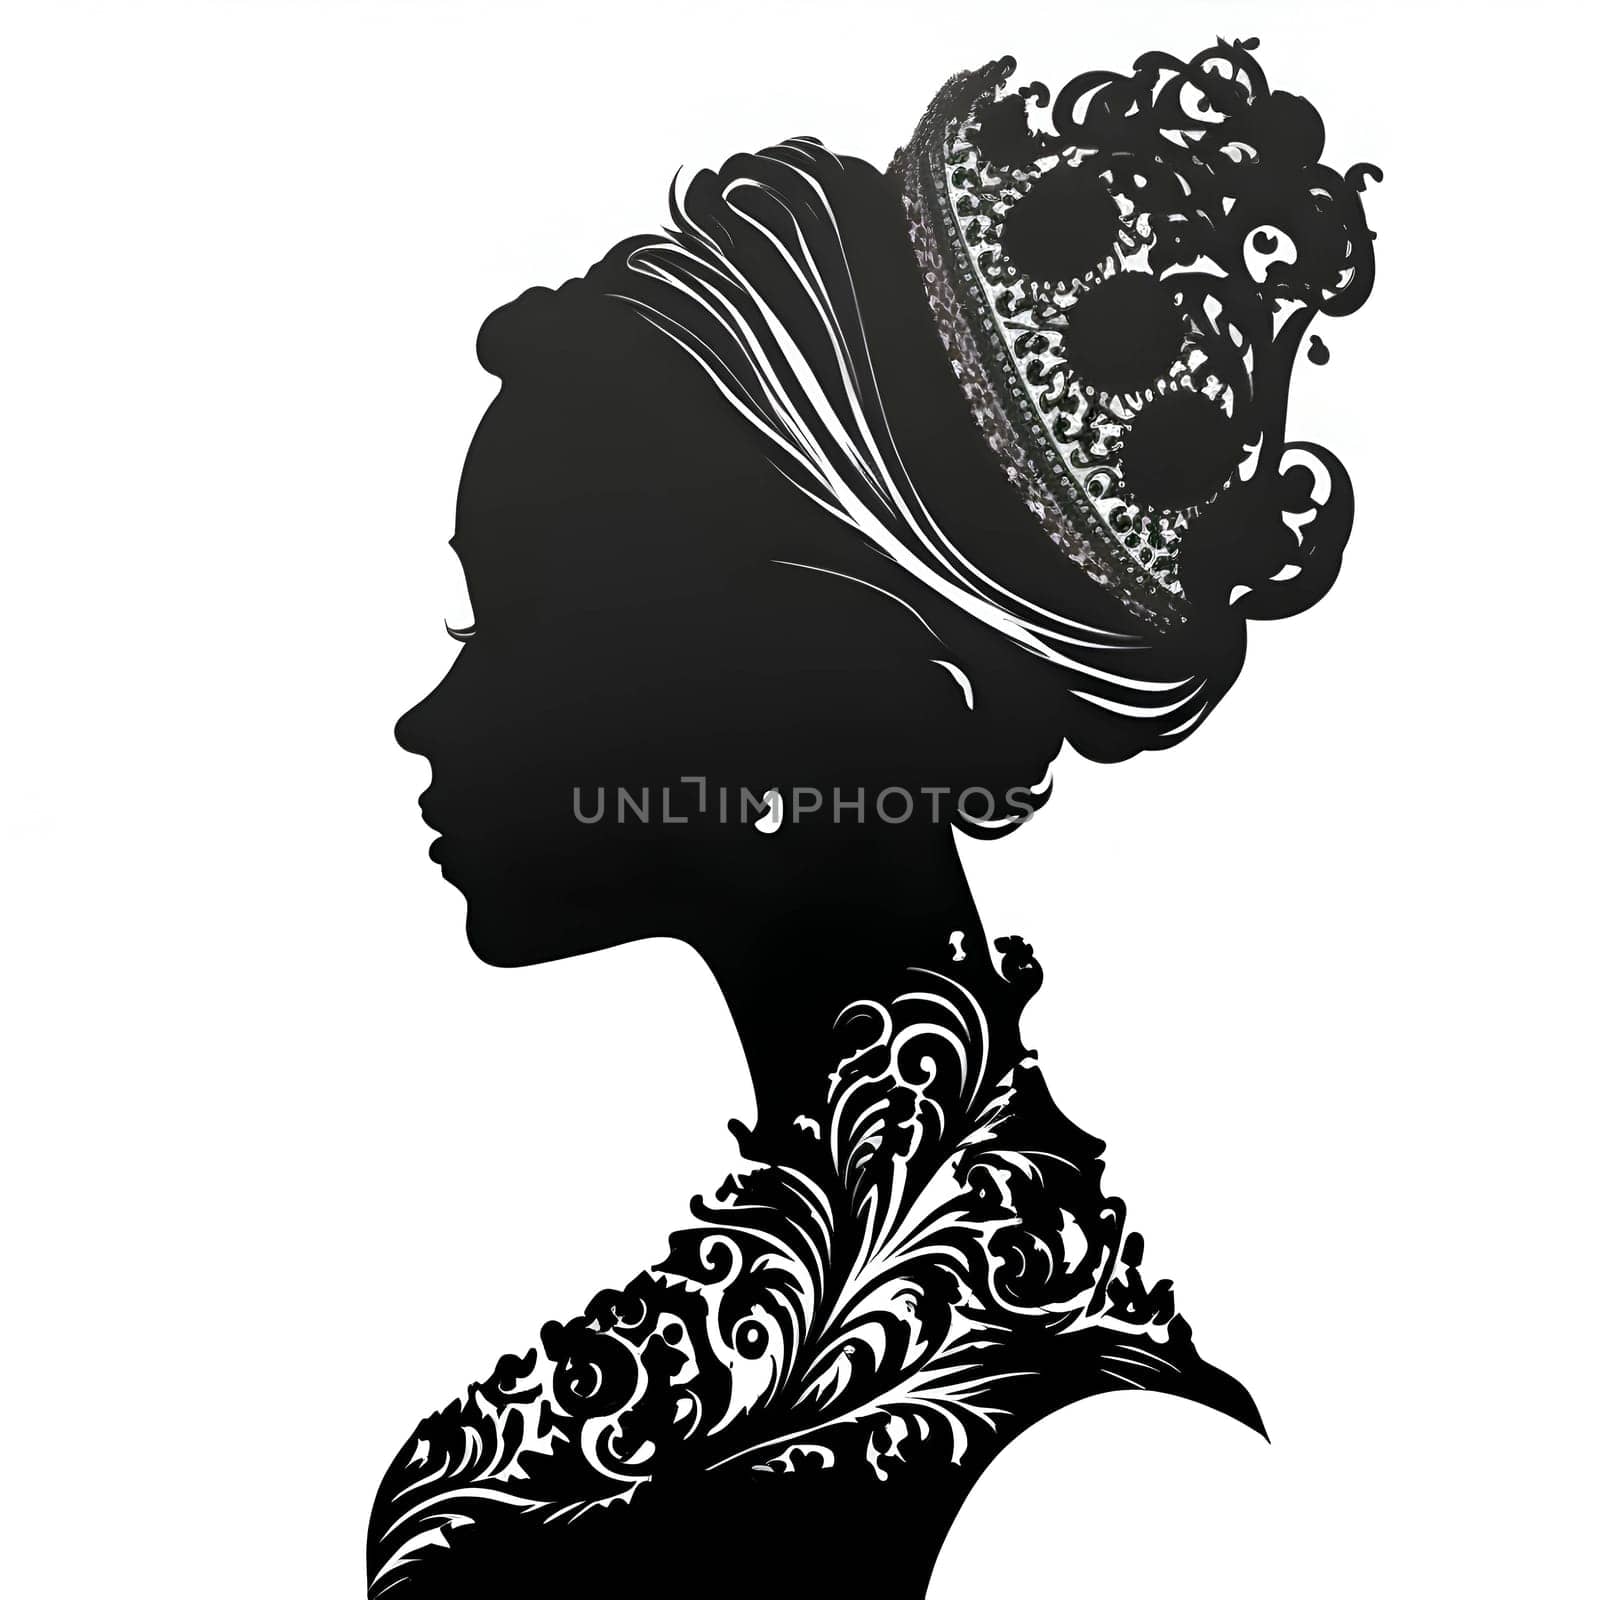 Vector illustration of a portrait of a woman in black silhouette against a clean white background, capturing graceful forms.